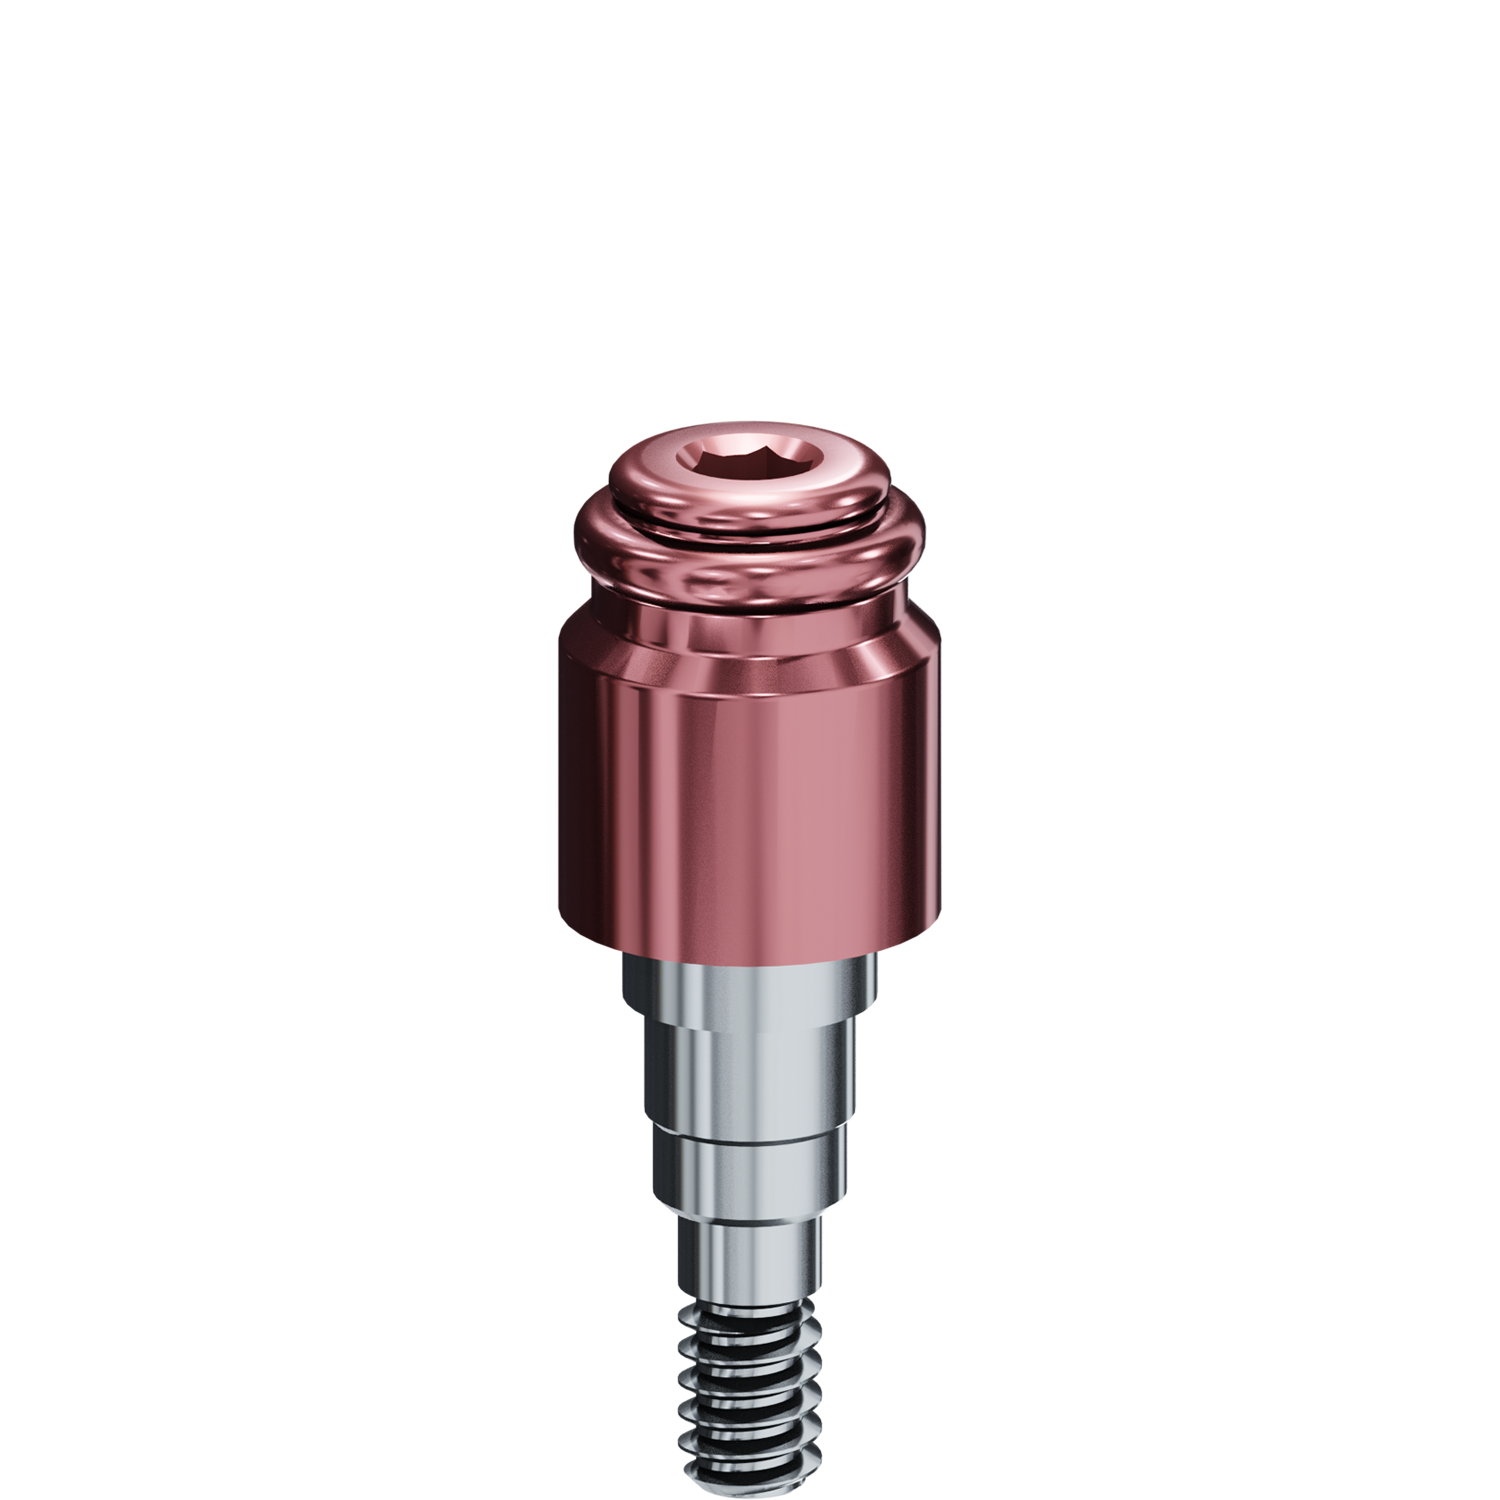 R-Tx Attachment System - Biomet 3i® - 4.1mm Certain Connection - 0.048" Drive - 2.0mm